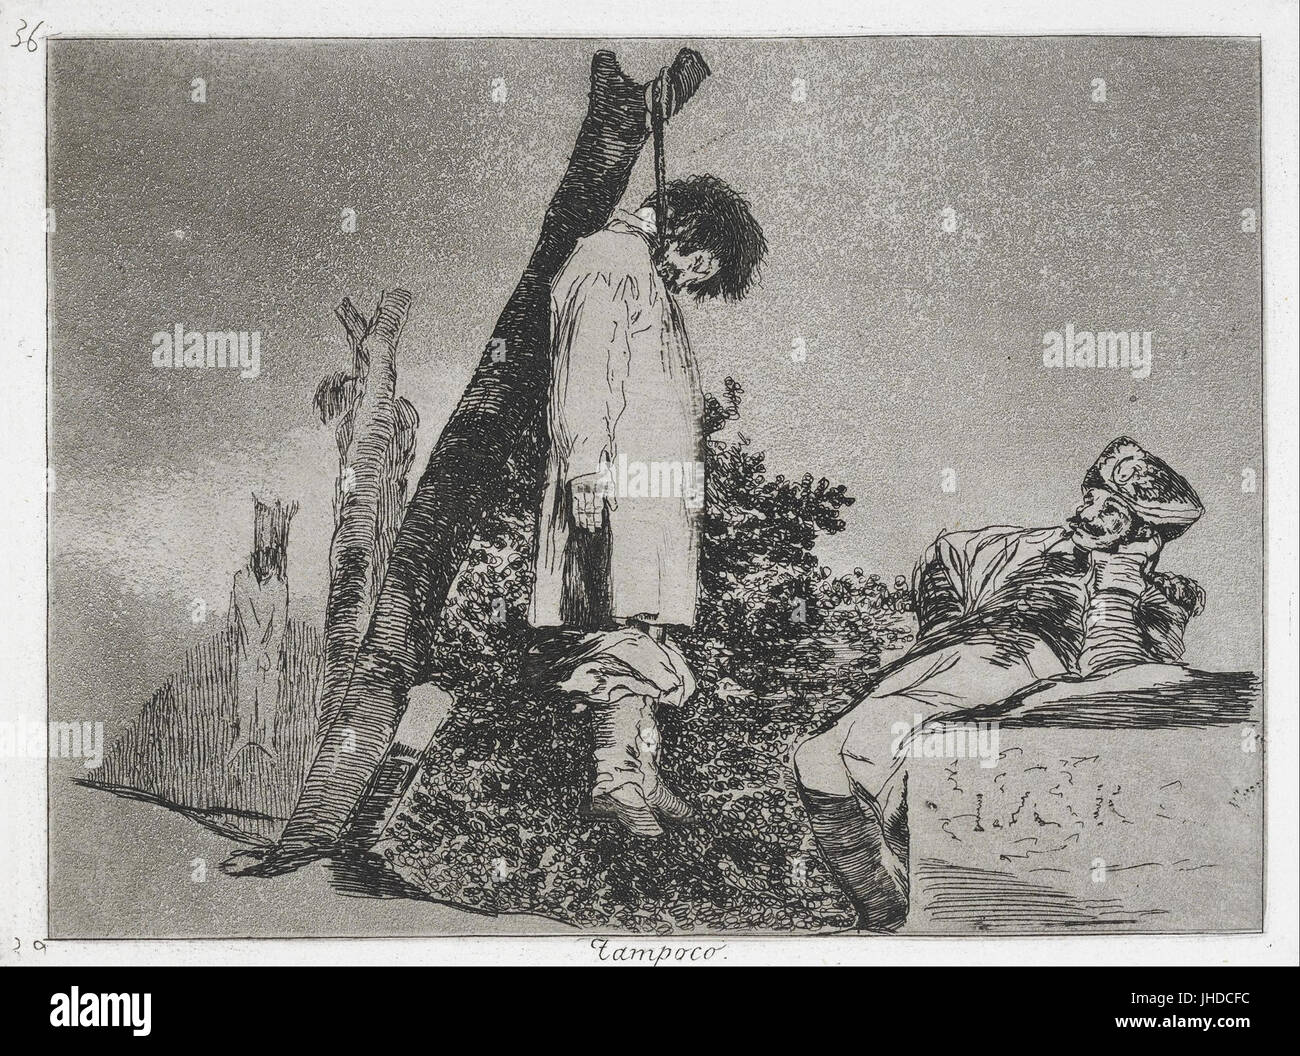 Francisco de Goya - Not (in this case) either (Tampoco) from the series The Disasters of War (Los Desastres de la Guerra... - Stock Photo